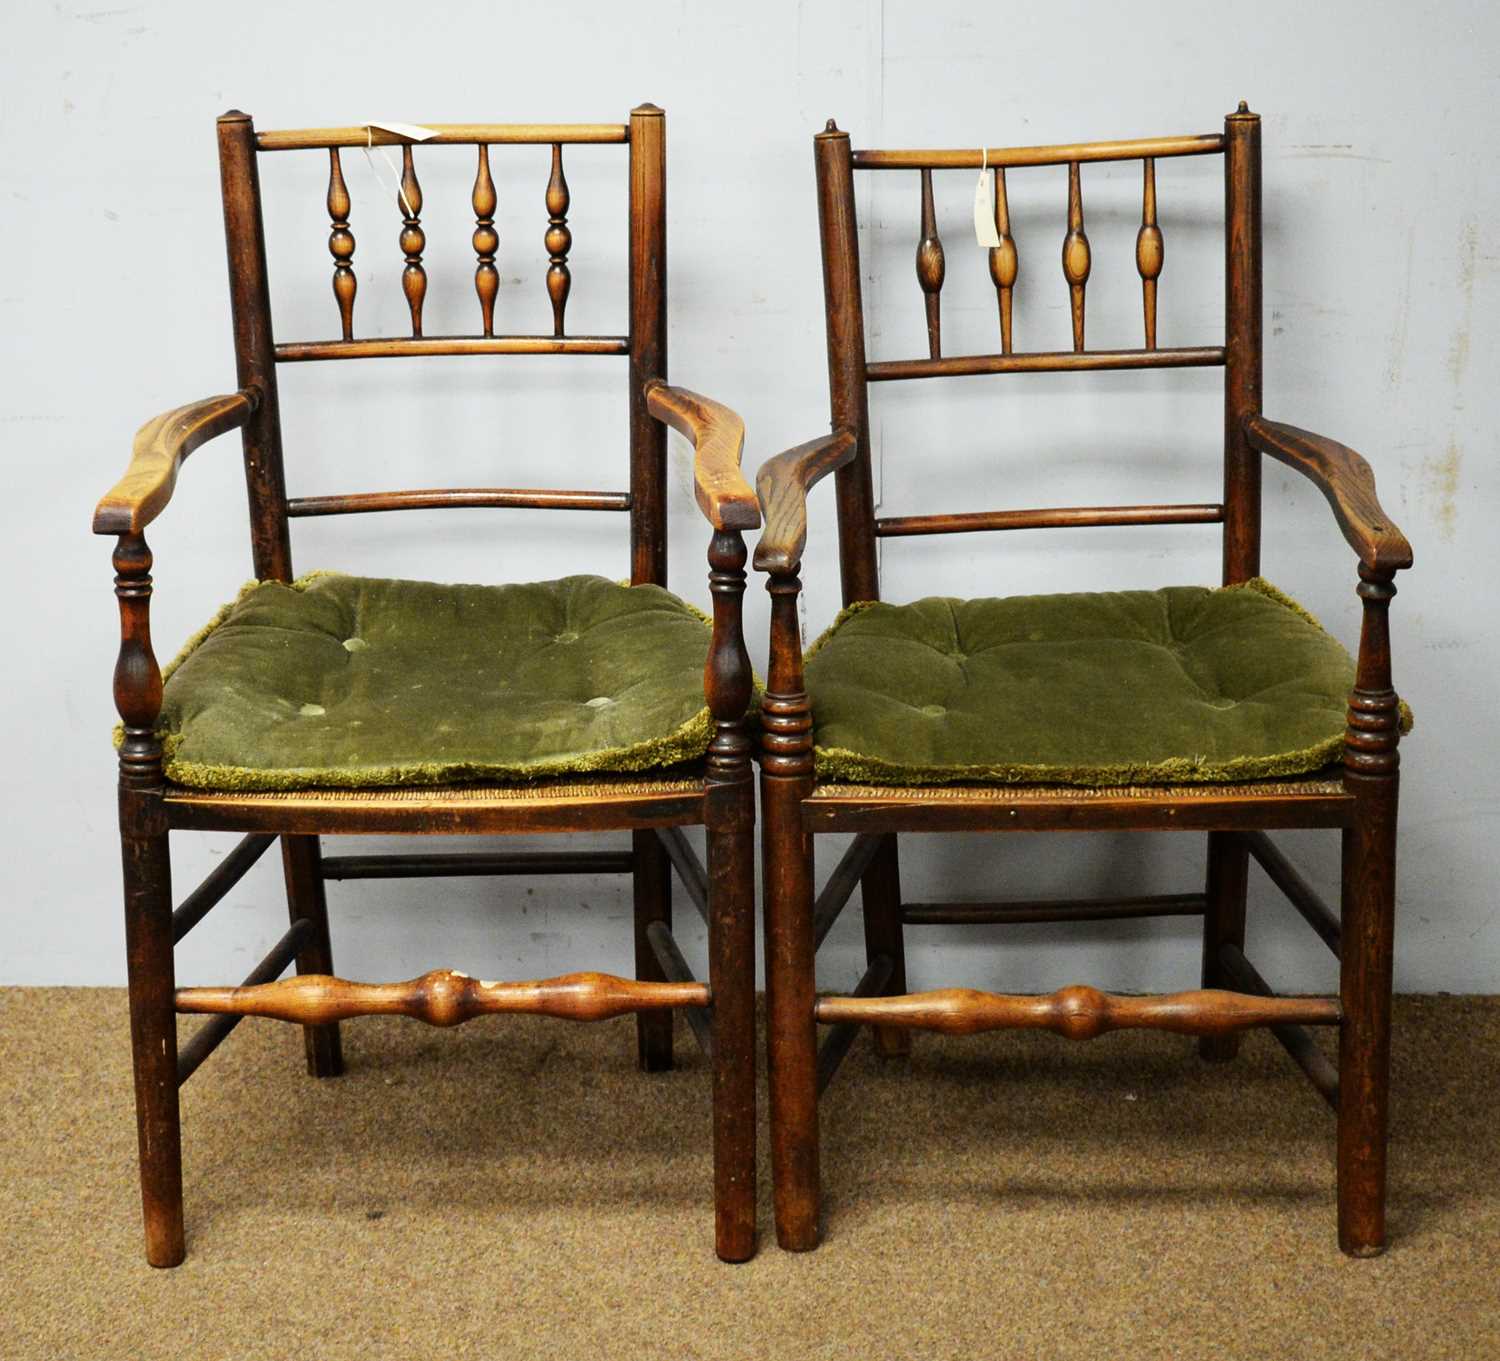 Two elm rush woven dining chairs